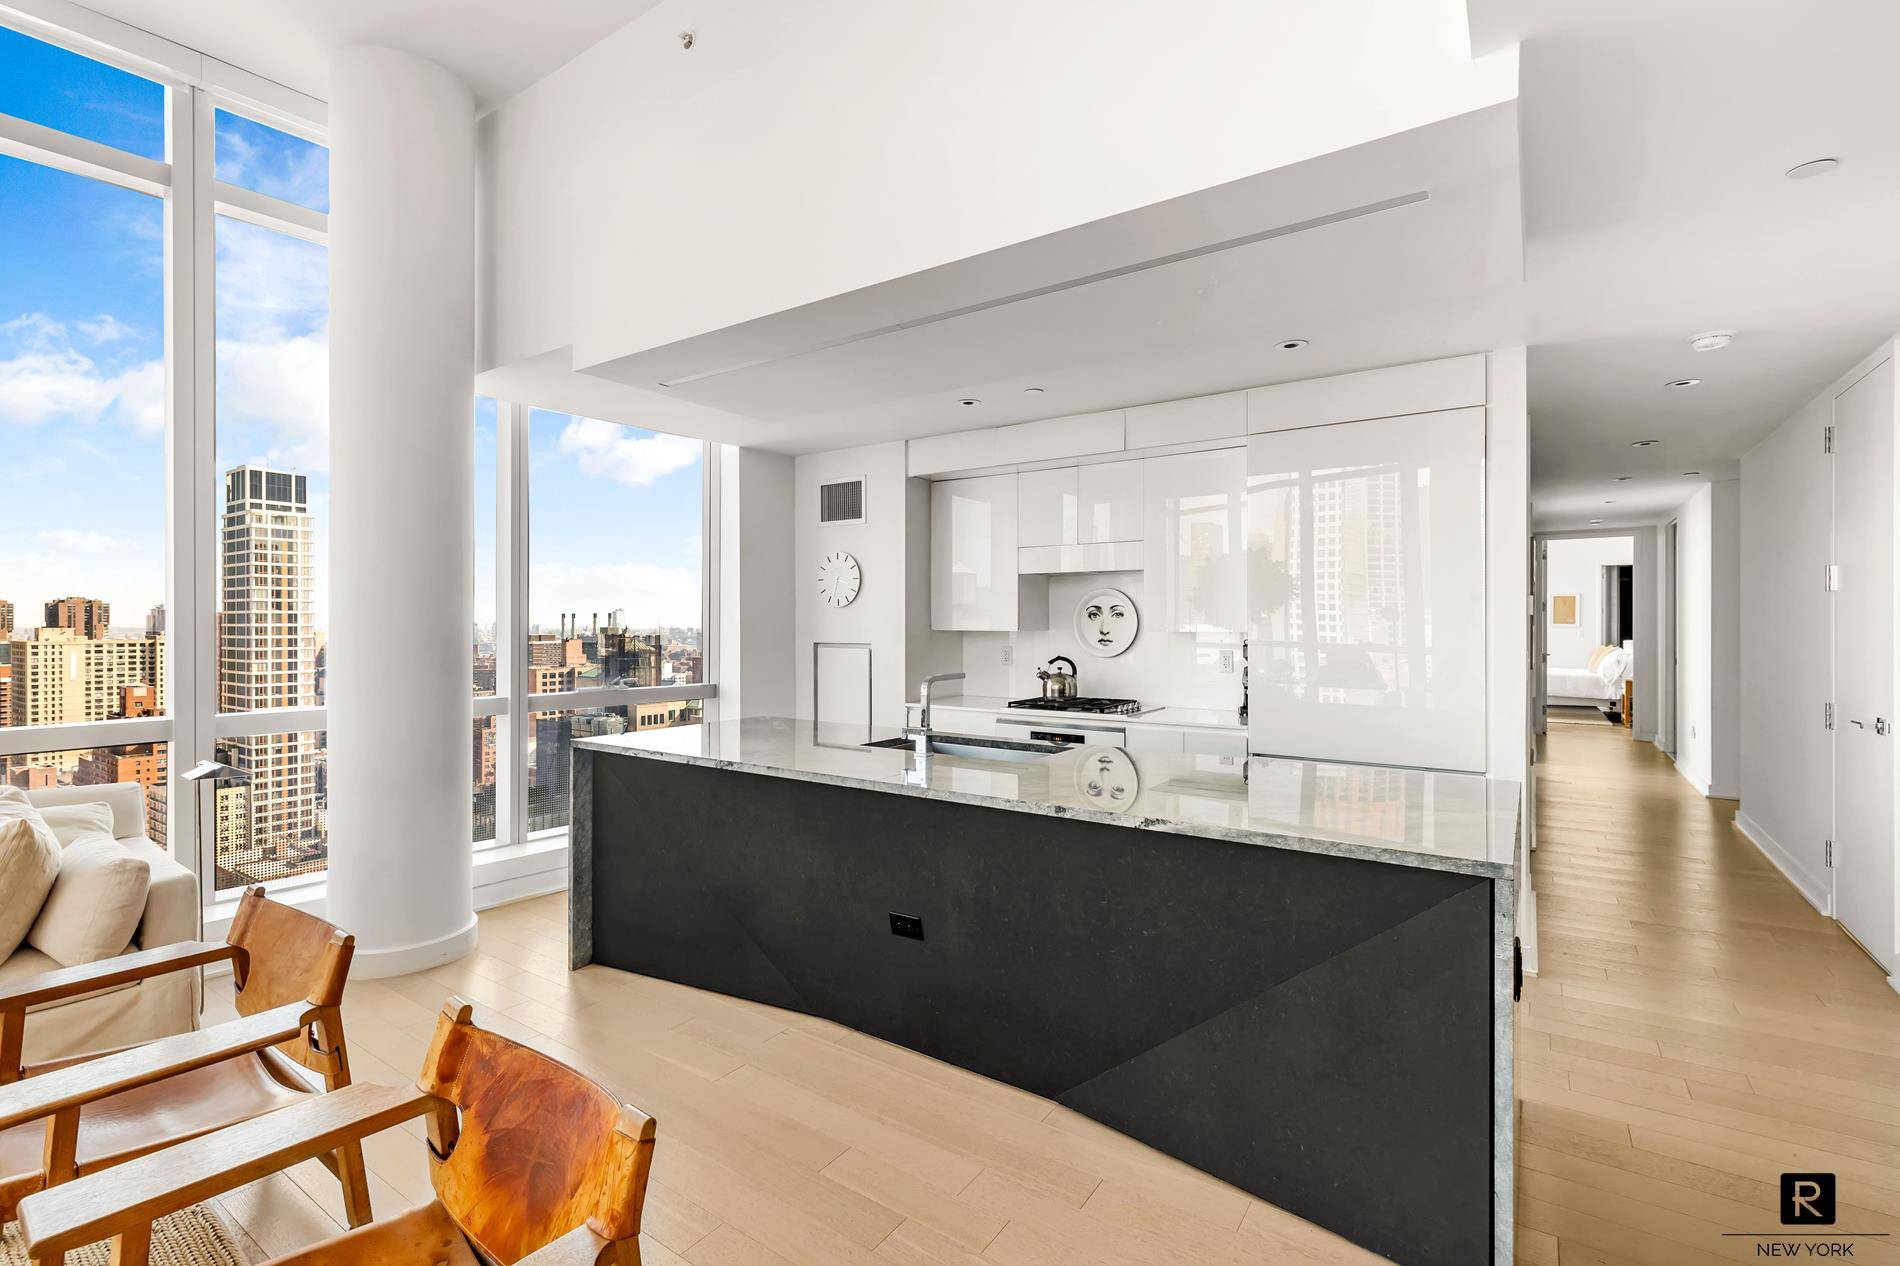 PANORAMIC NEW YORK CITY VIEWS from this sprawling, high floor three bedroom in 400 Park Avenue South.